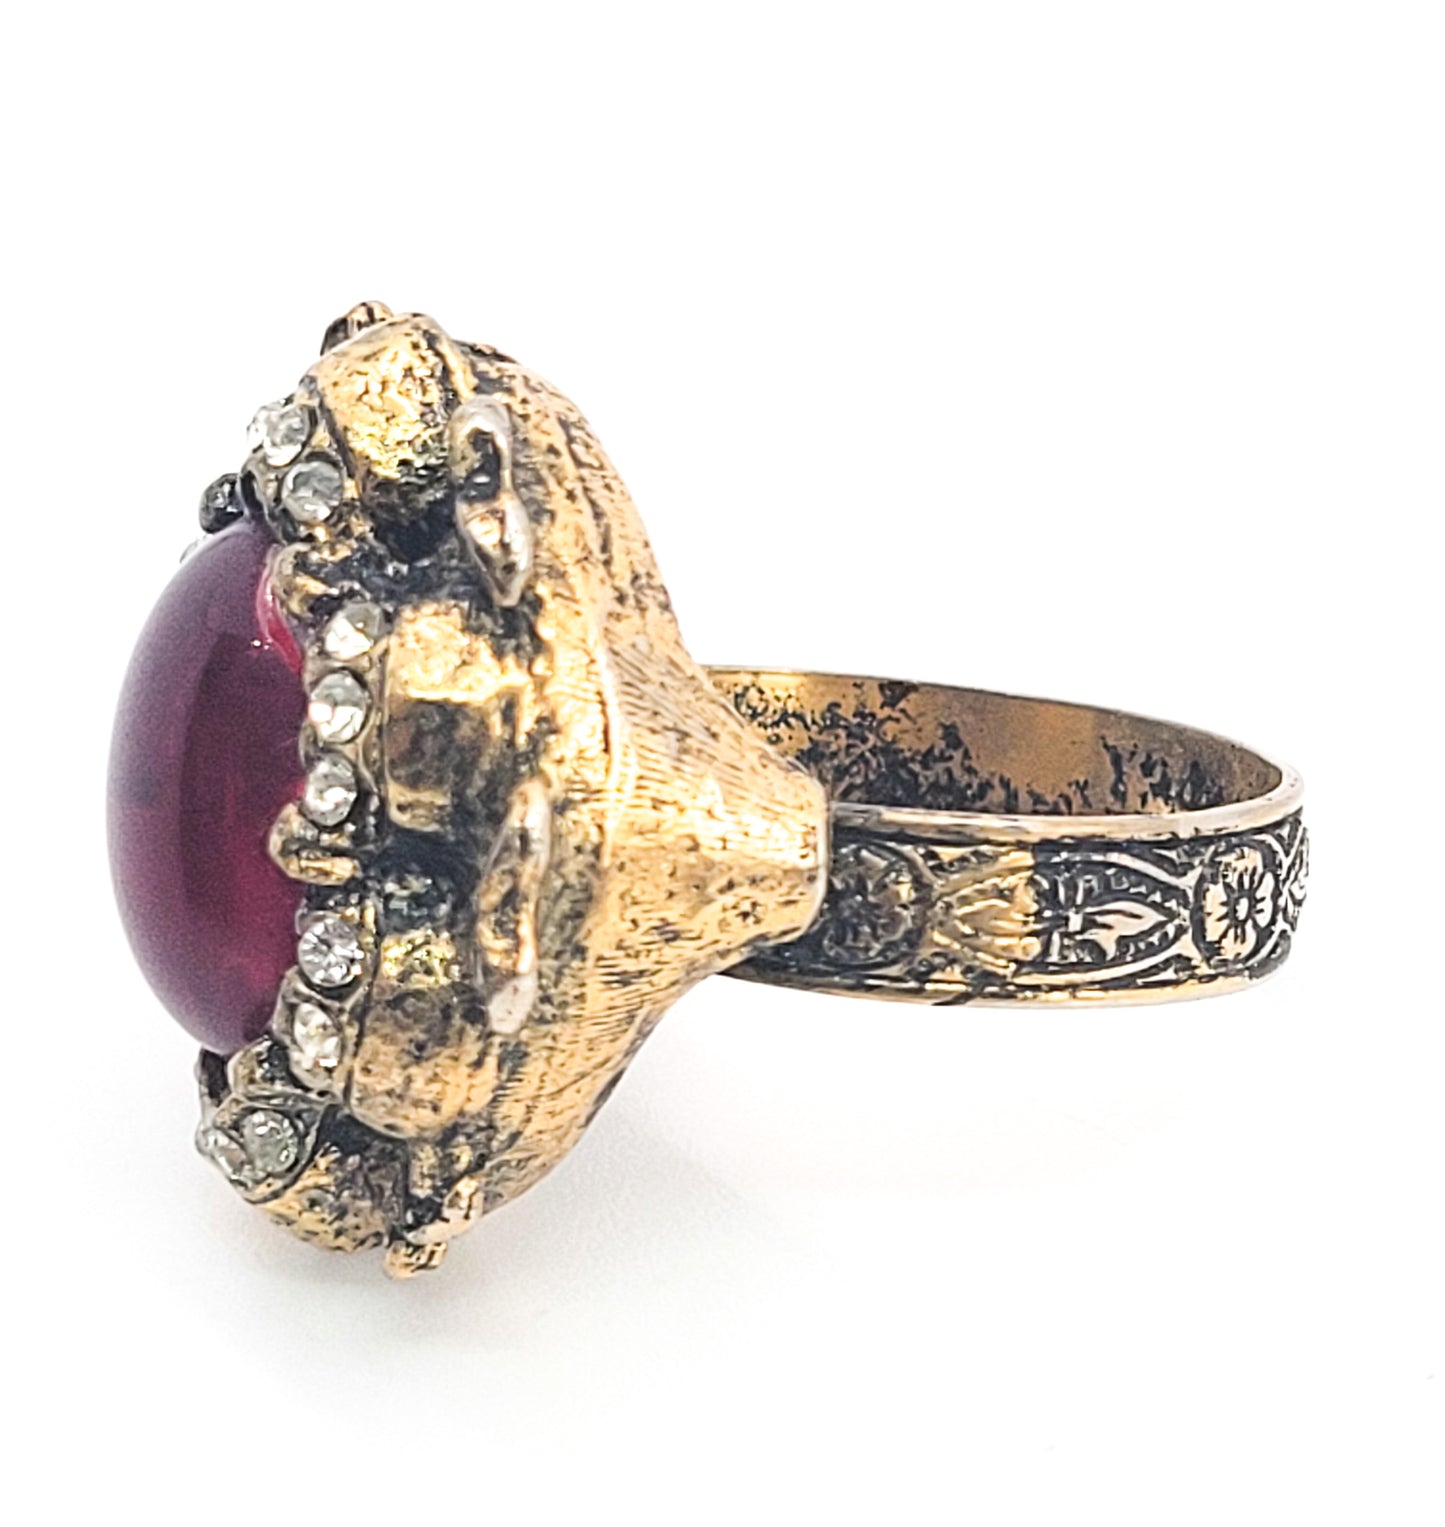 Ruby Red Jelly Belly rococo style clear rhinestone gold adjustable vintage ring